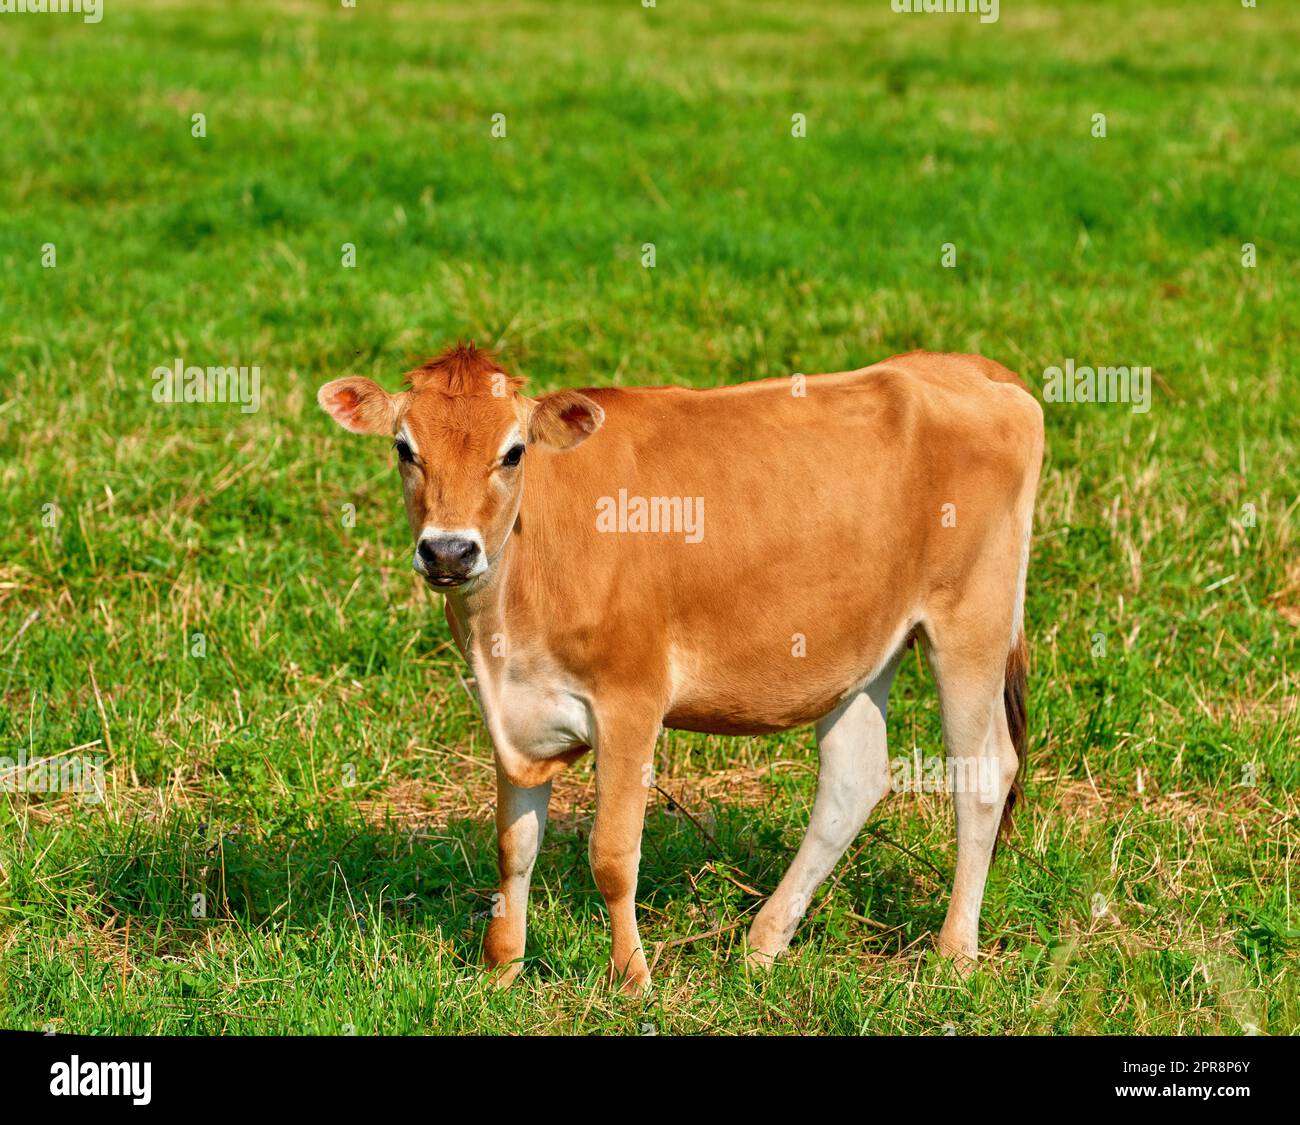 Portrait of a brown cow grazing on green farmland in the countryside. Cattle or livestock standing on an open, empty and secluded grassy field or meadow. Animal in its natural environment in nature Stock Photo